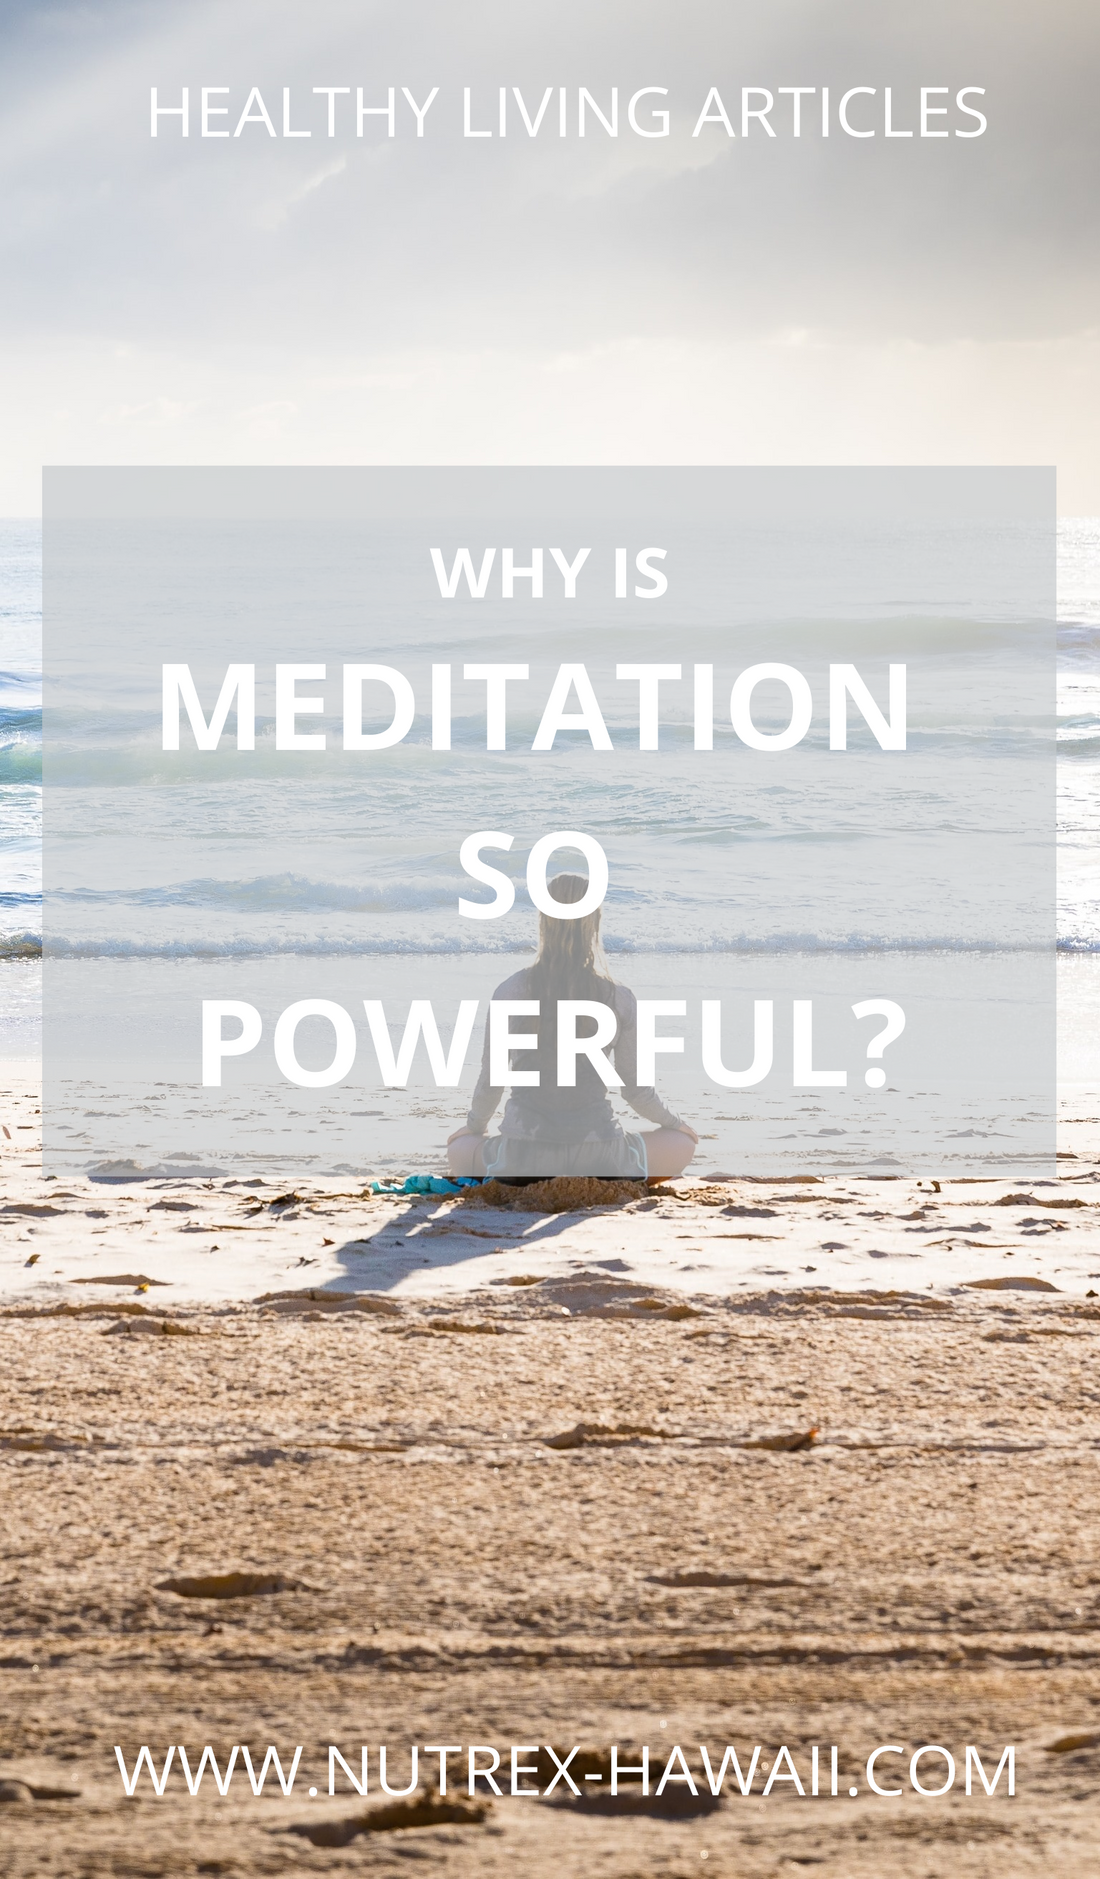 Why is Meditation so Powerful?